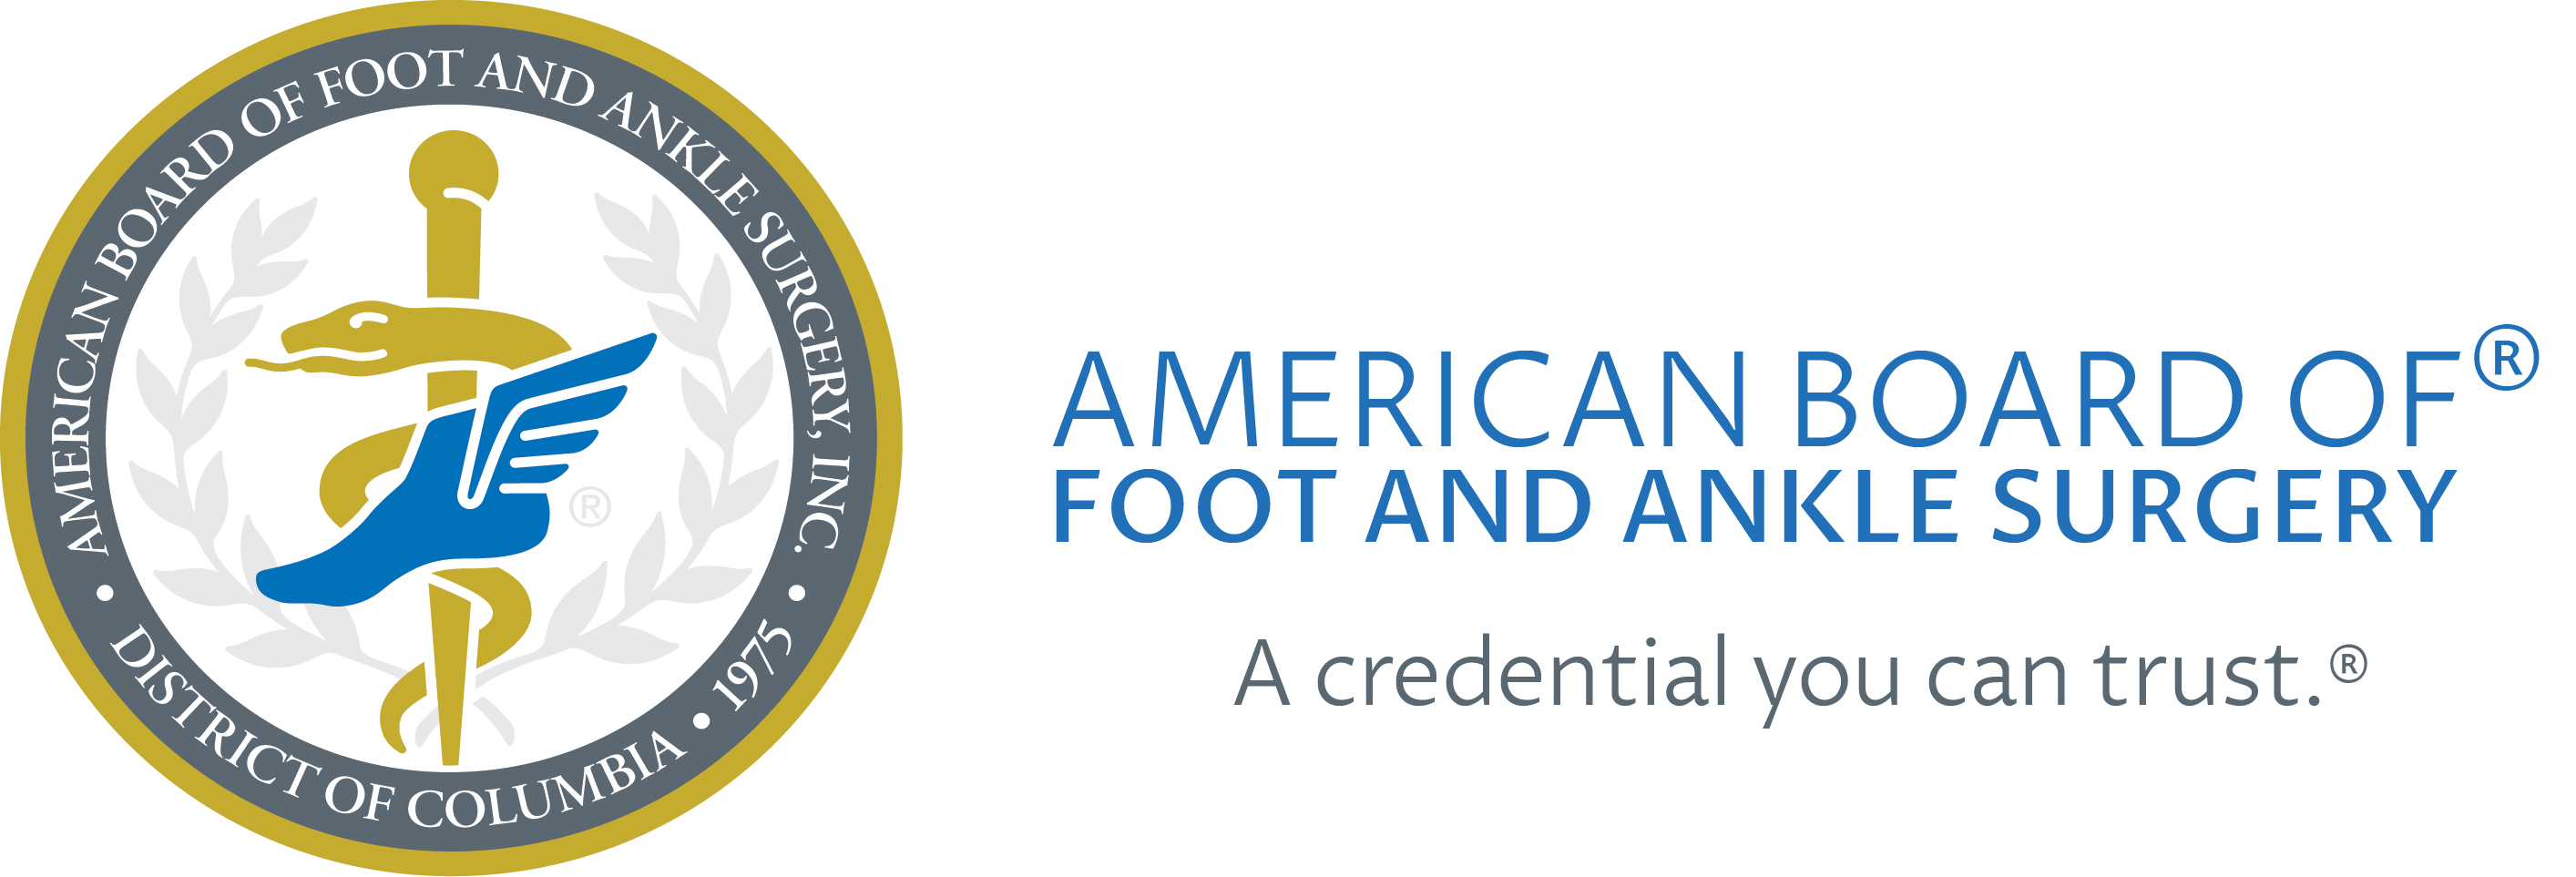 American Board of Foot and Ankle Surgery The Western Foot and Ankle